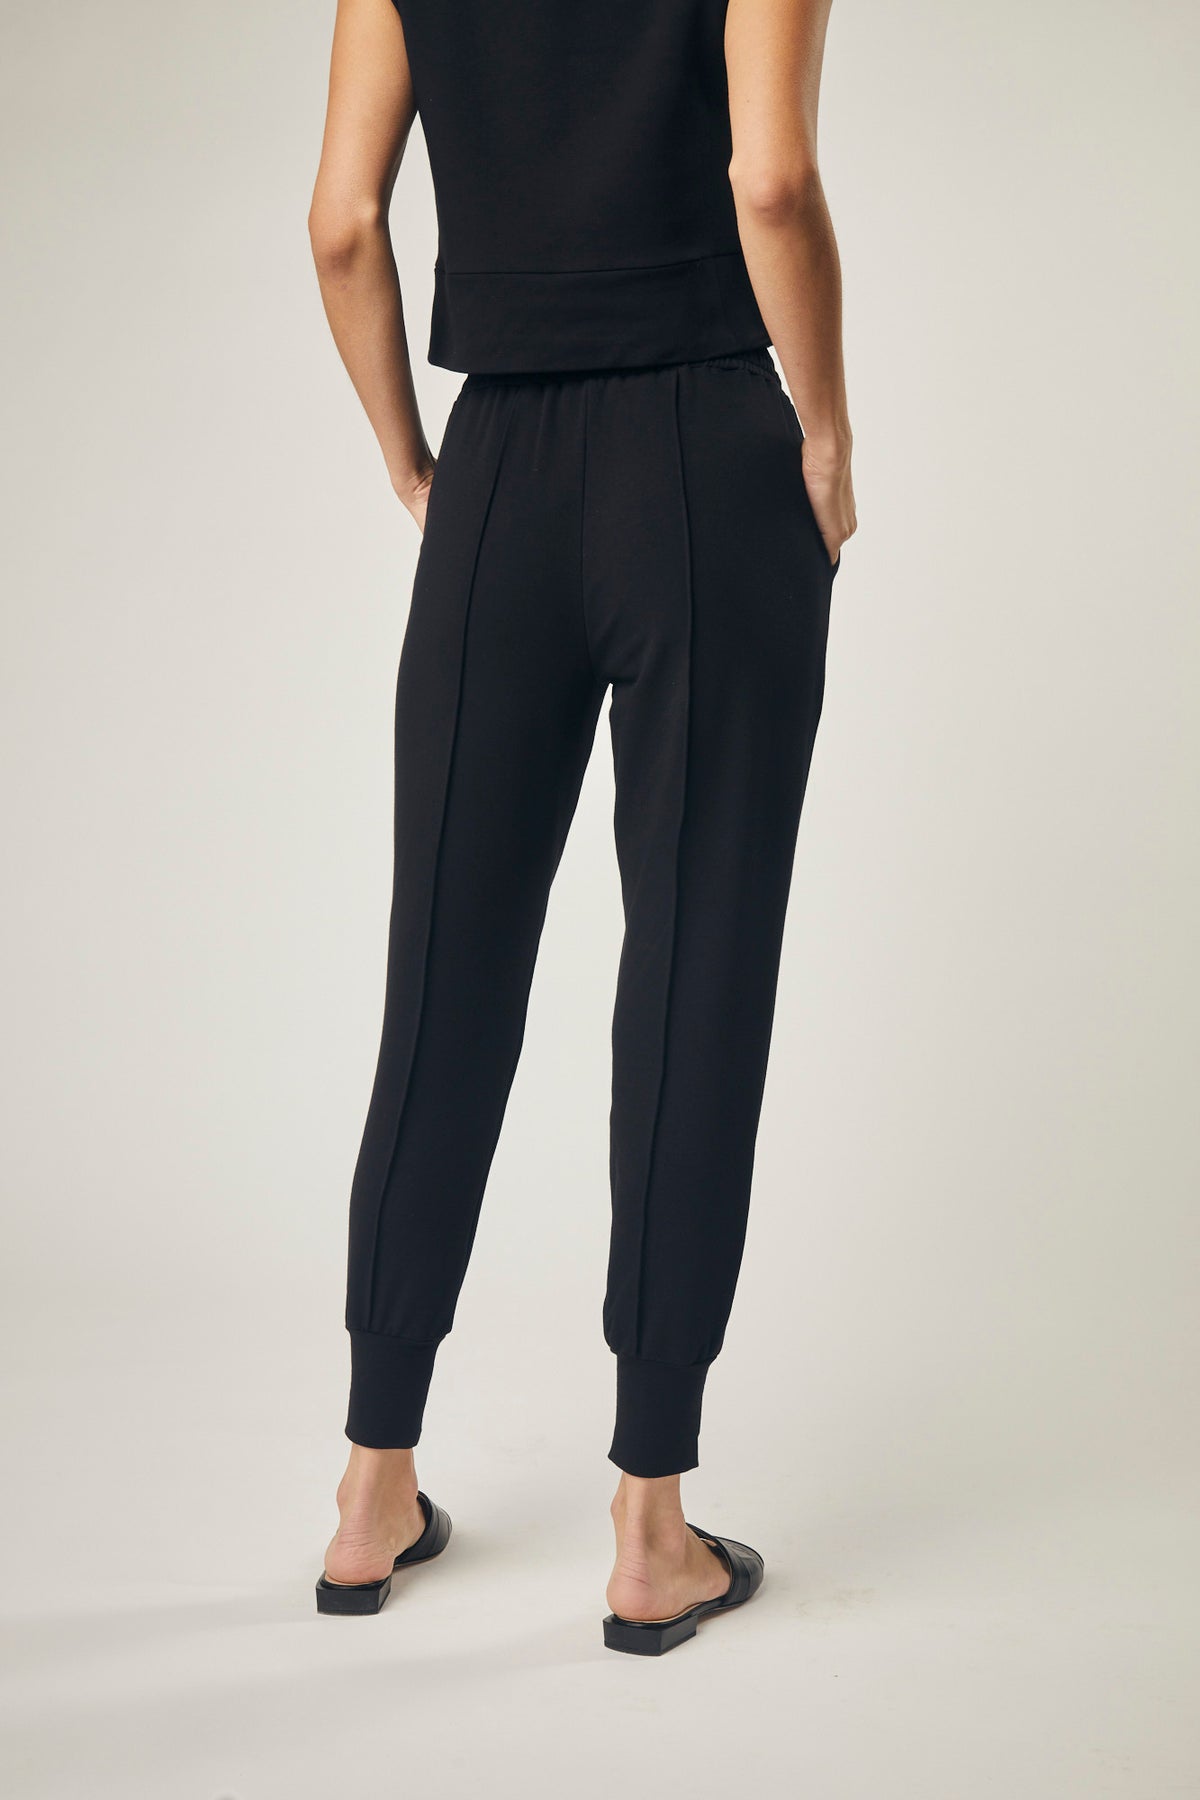 Farrah French Terry Pants In Black